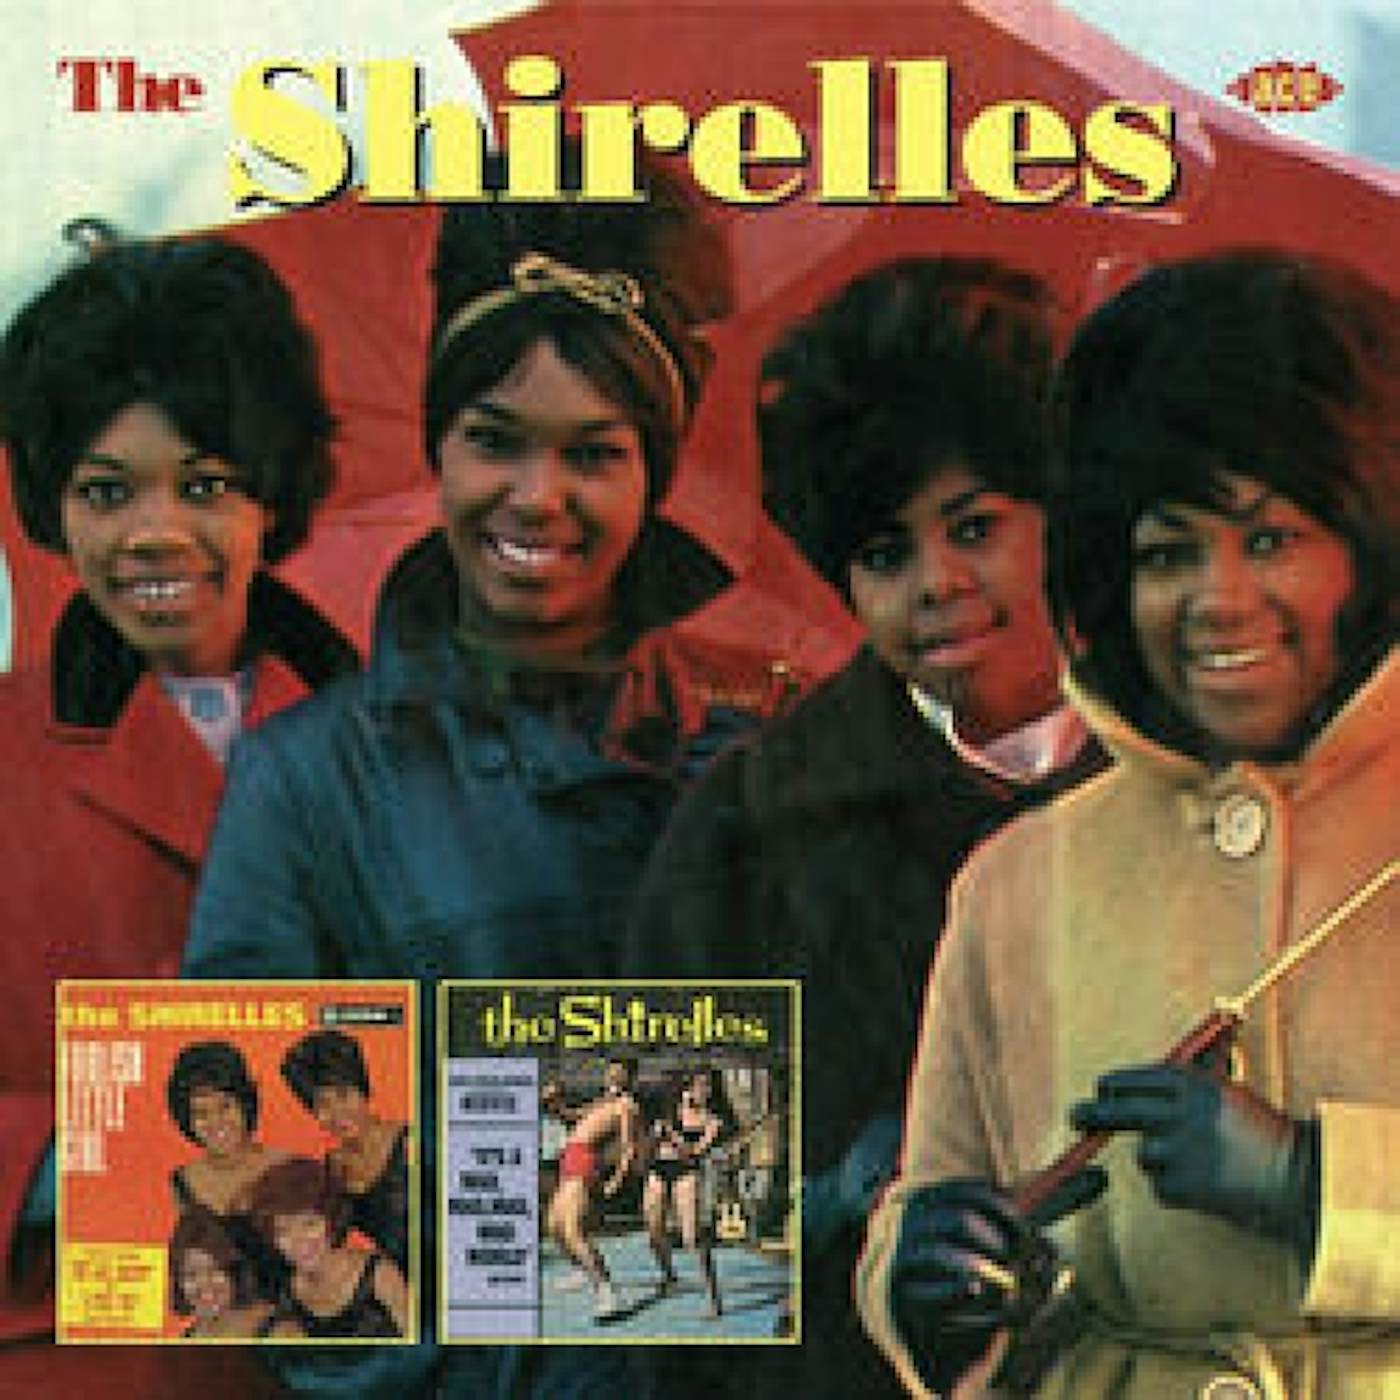 The Shirelles FOOLISH LITTLE GIRL / SING THEIR HITS FROM IT'S CD